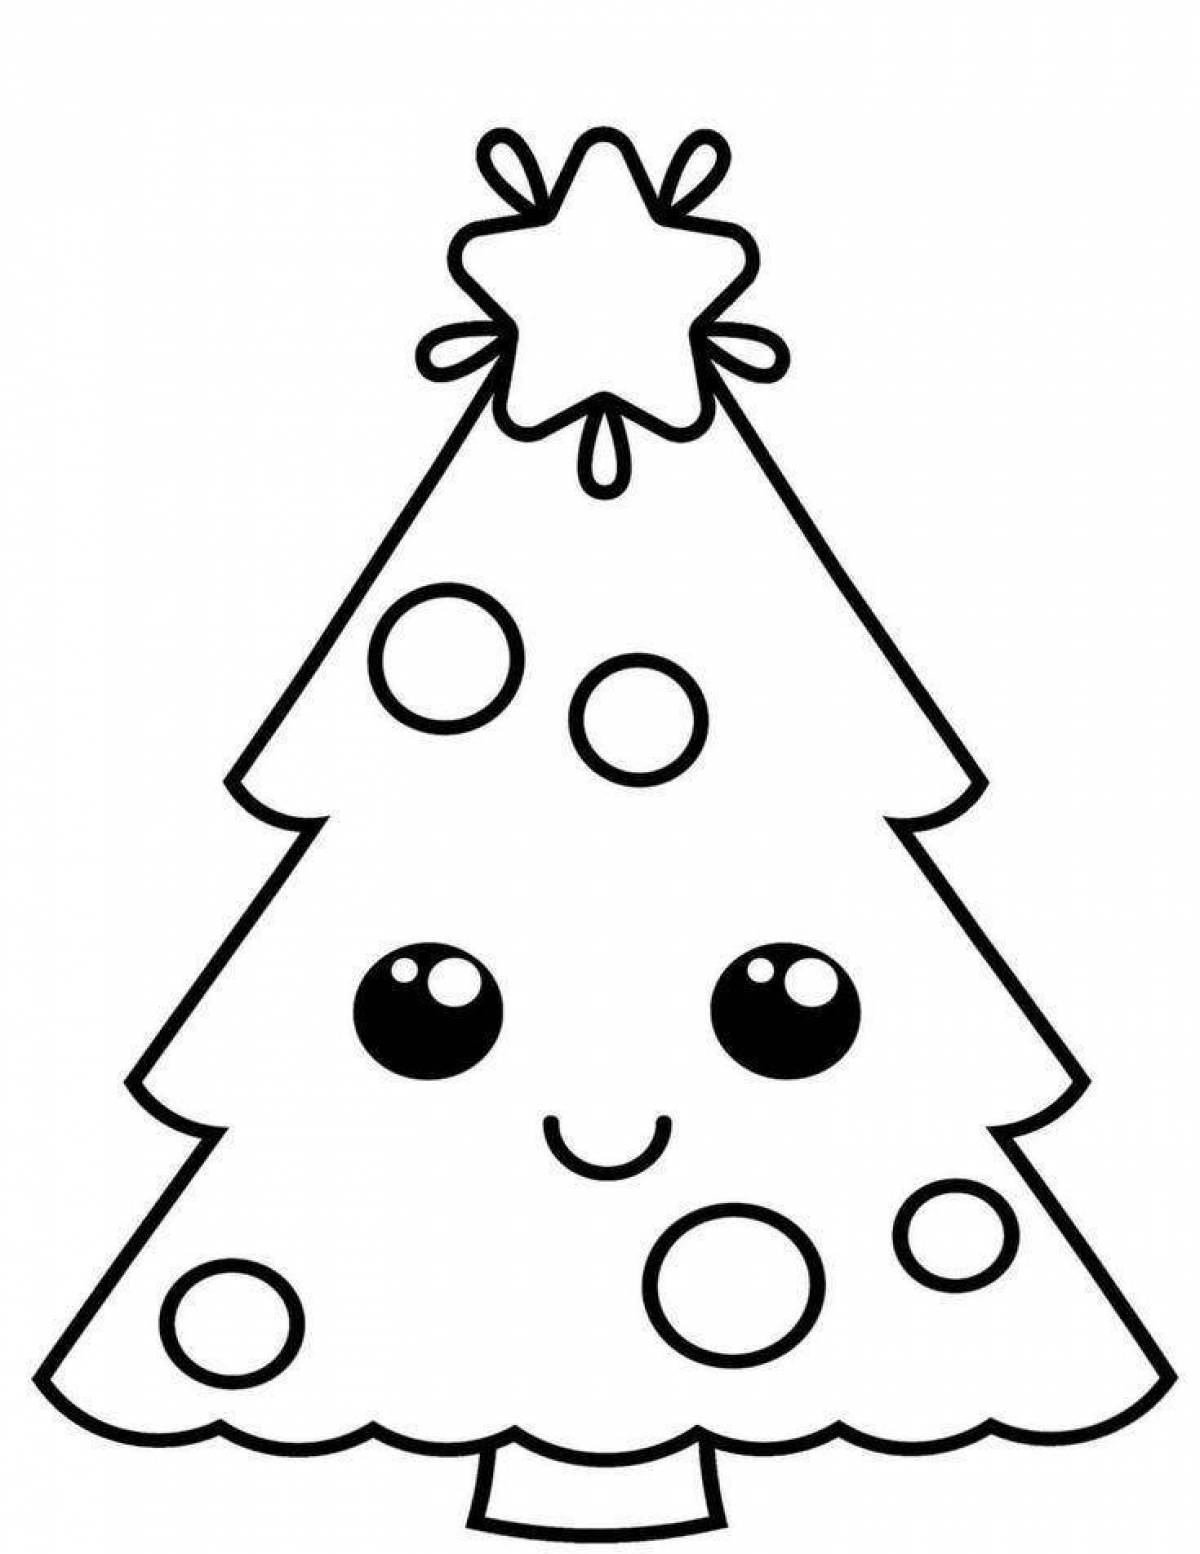 Shining Christmas tree coloring book for children 5-6 years old